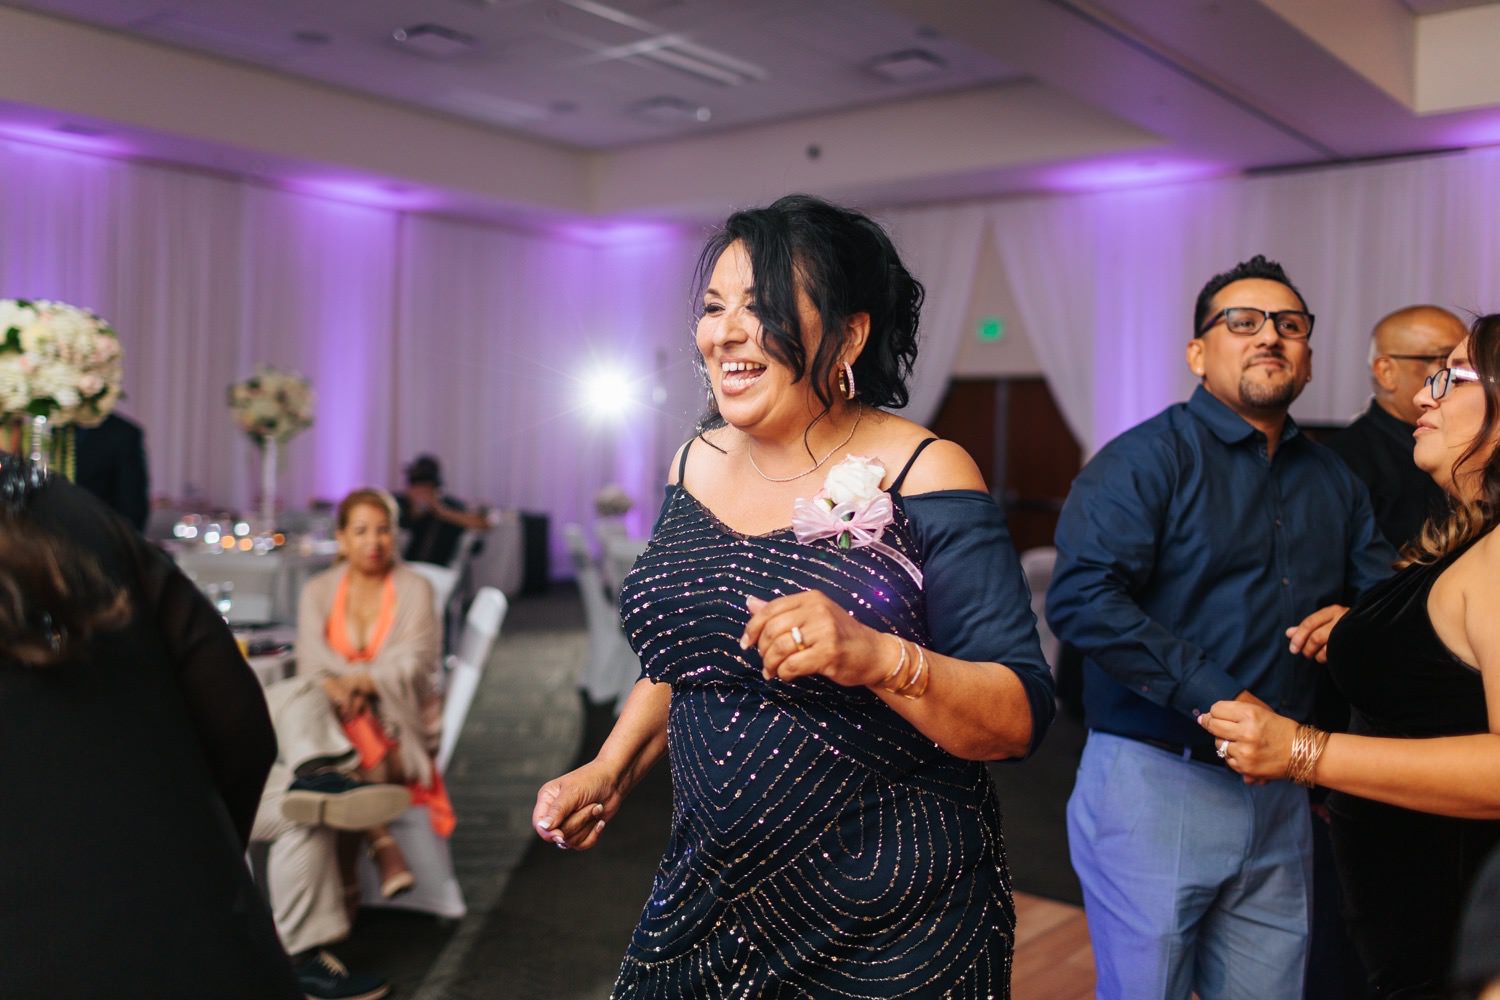 Guests dancing during Wedding Reception - https://brittneyhannonphotography.com